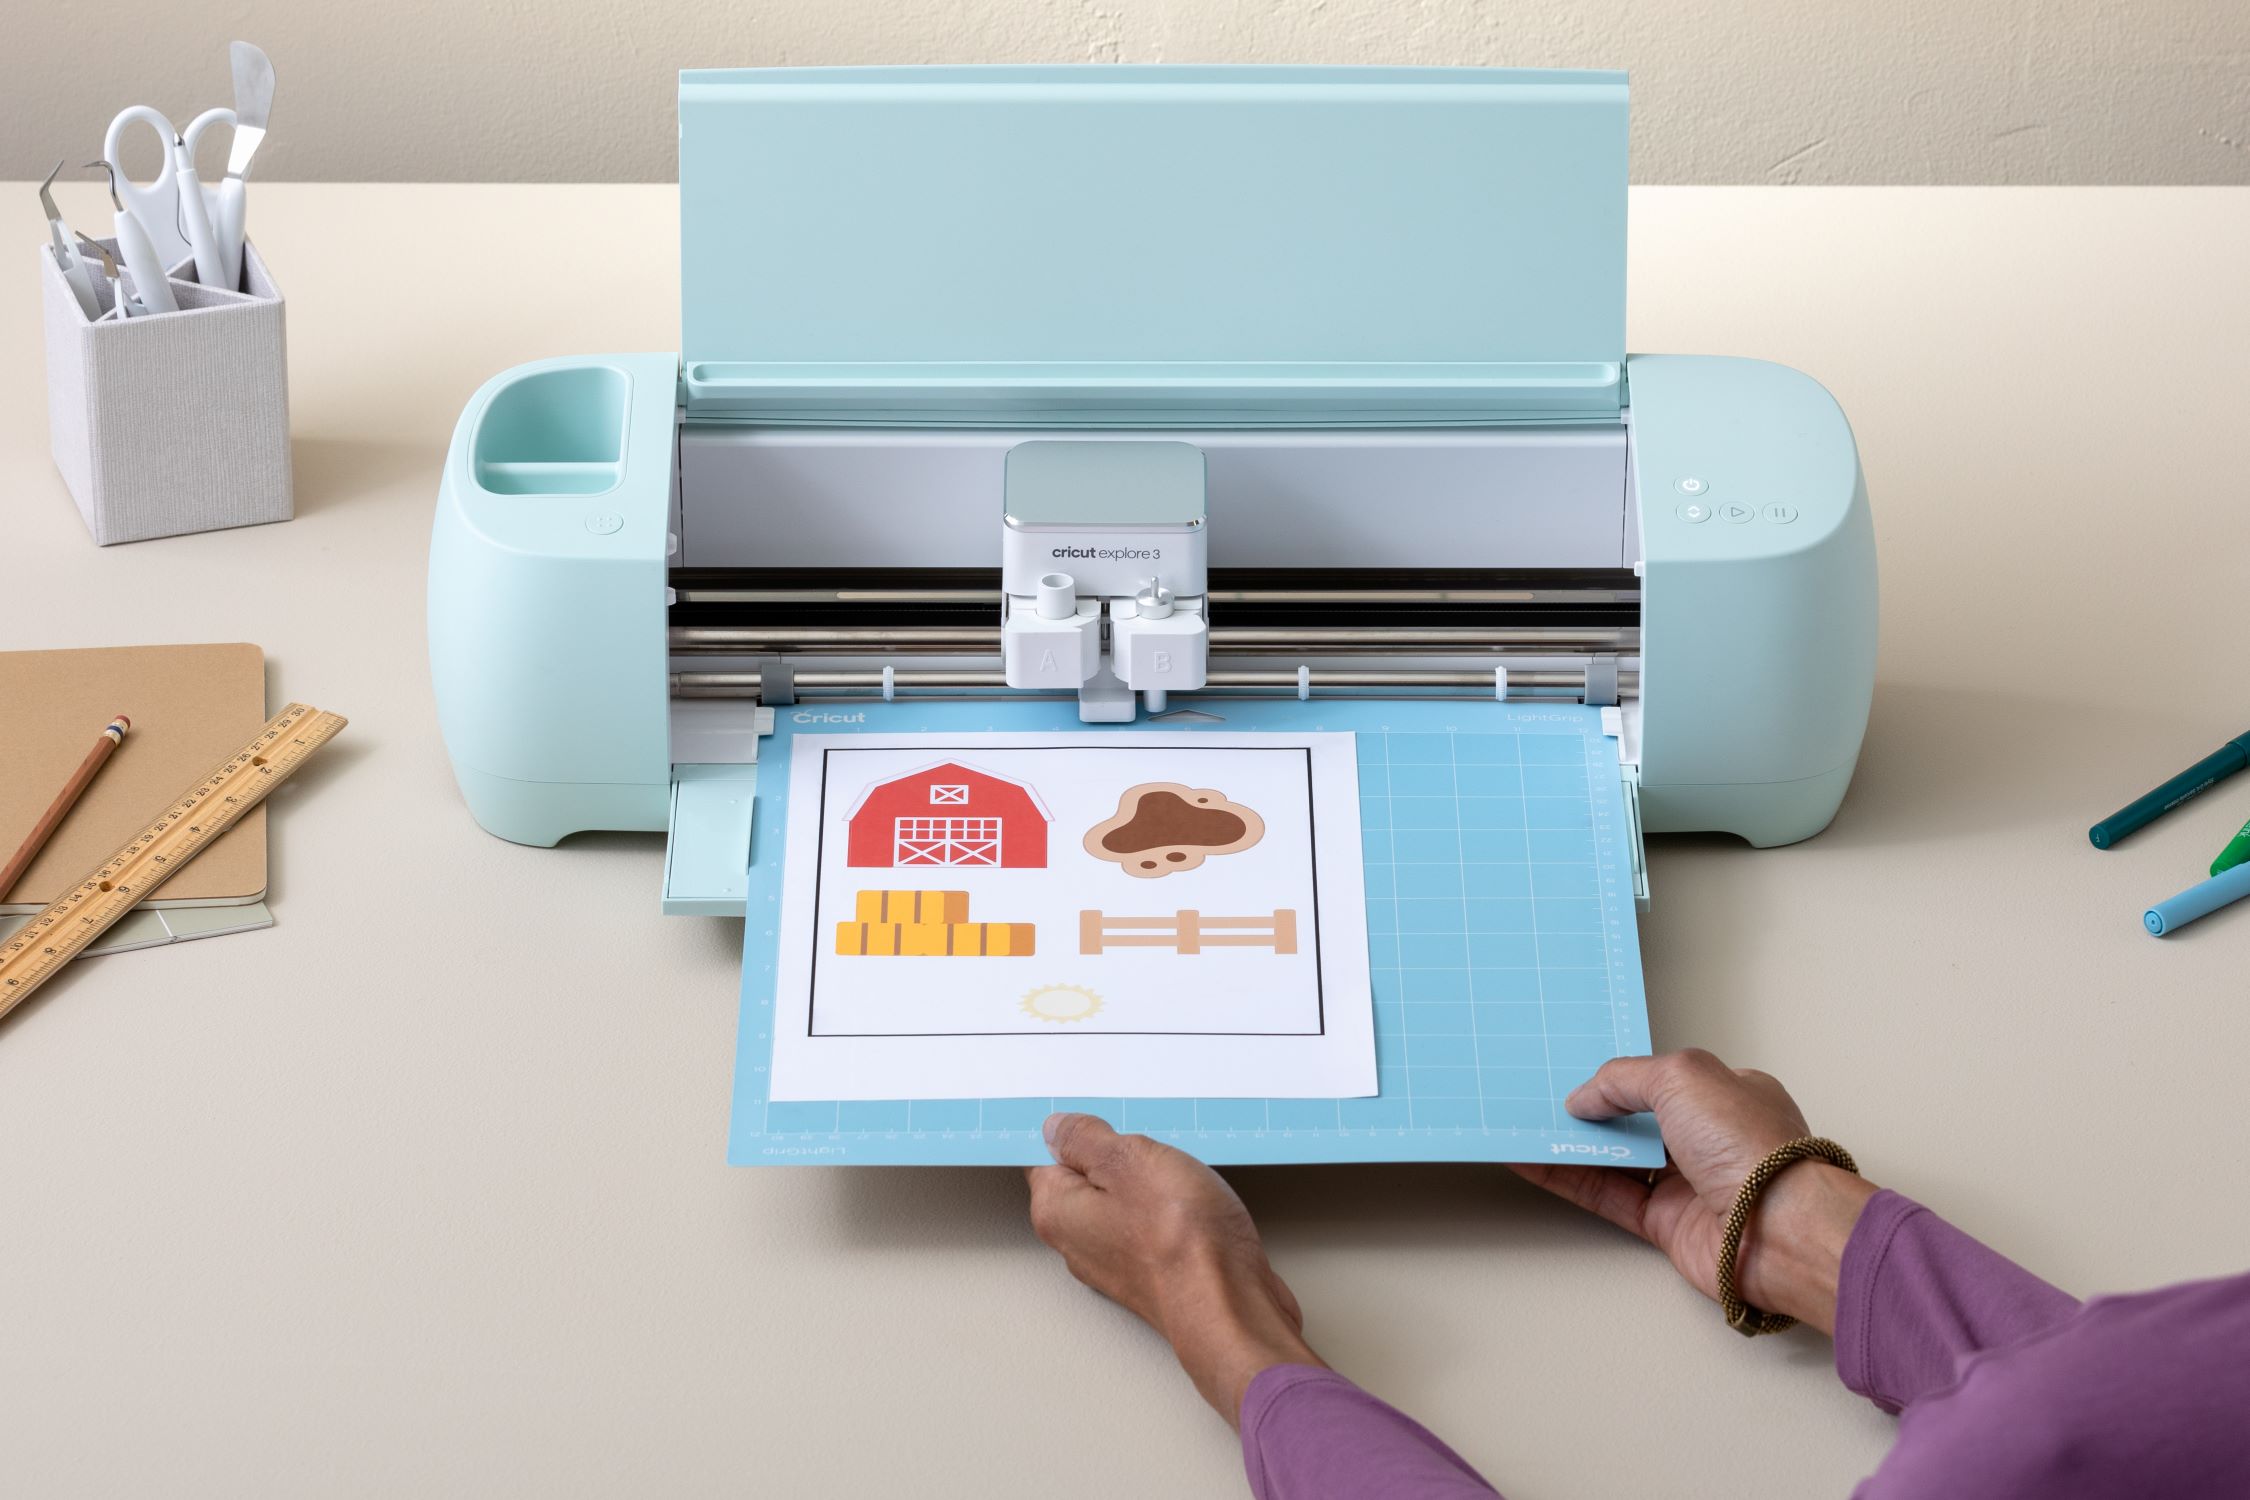 How To Connect Cricut To Printer